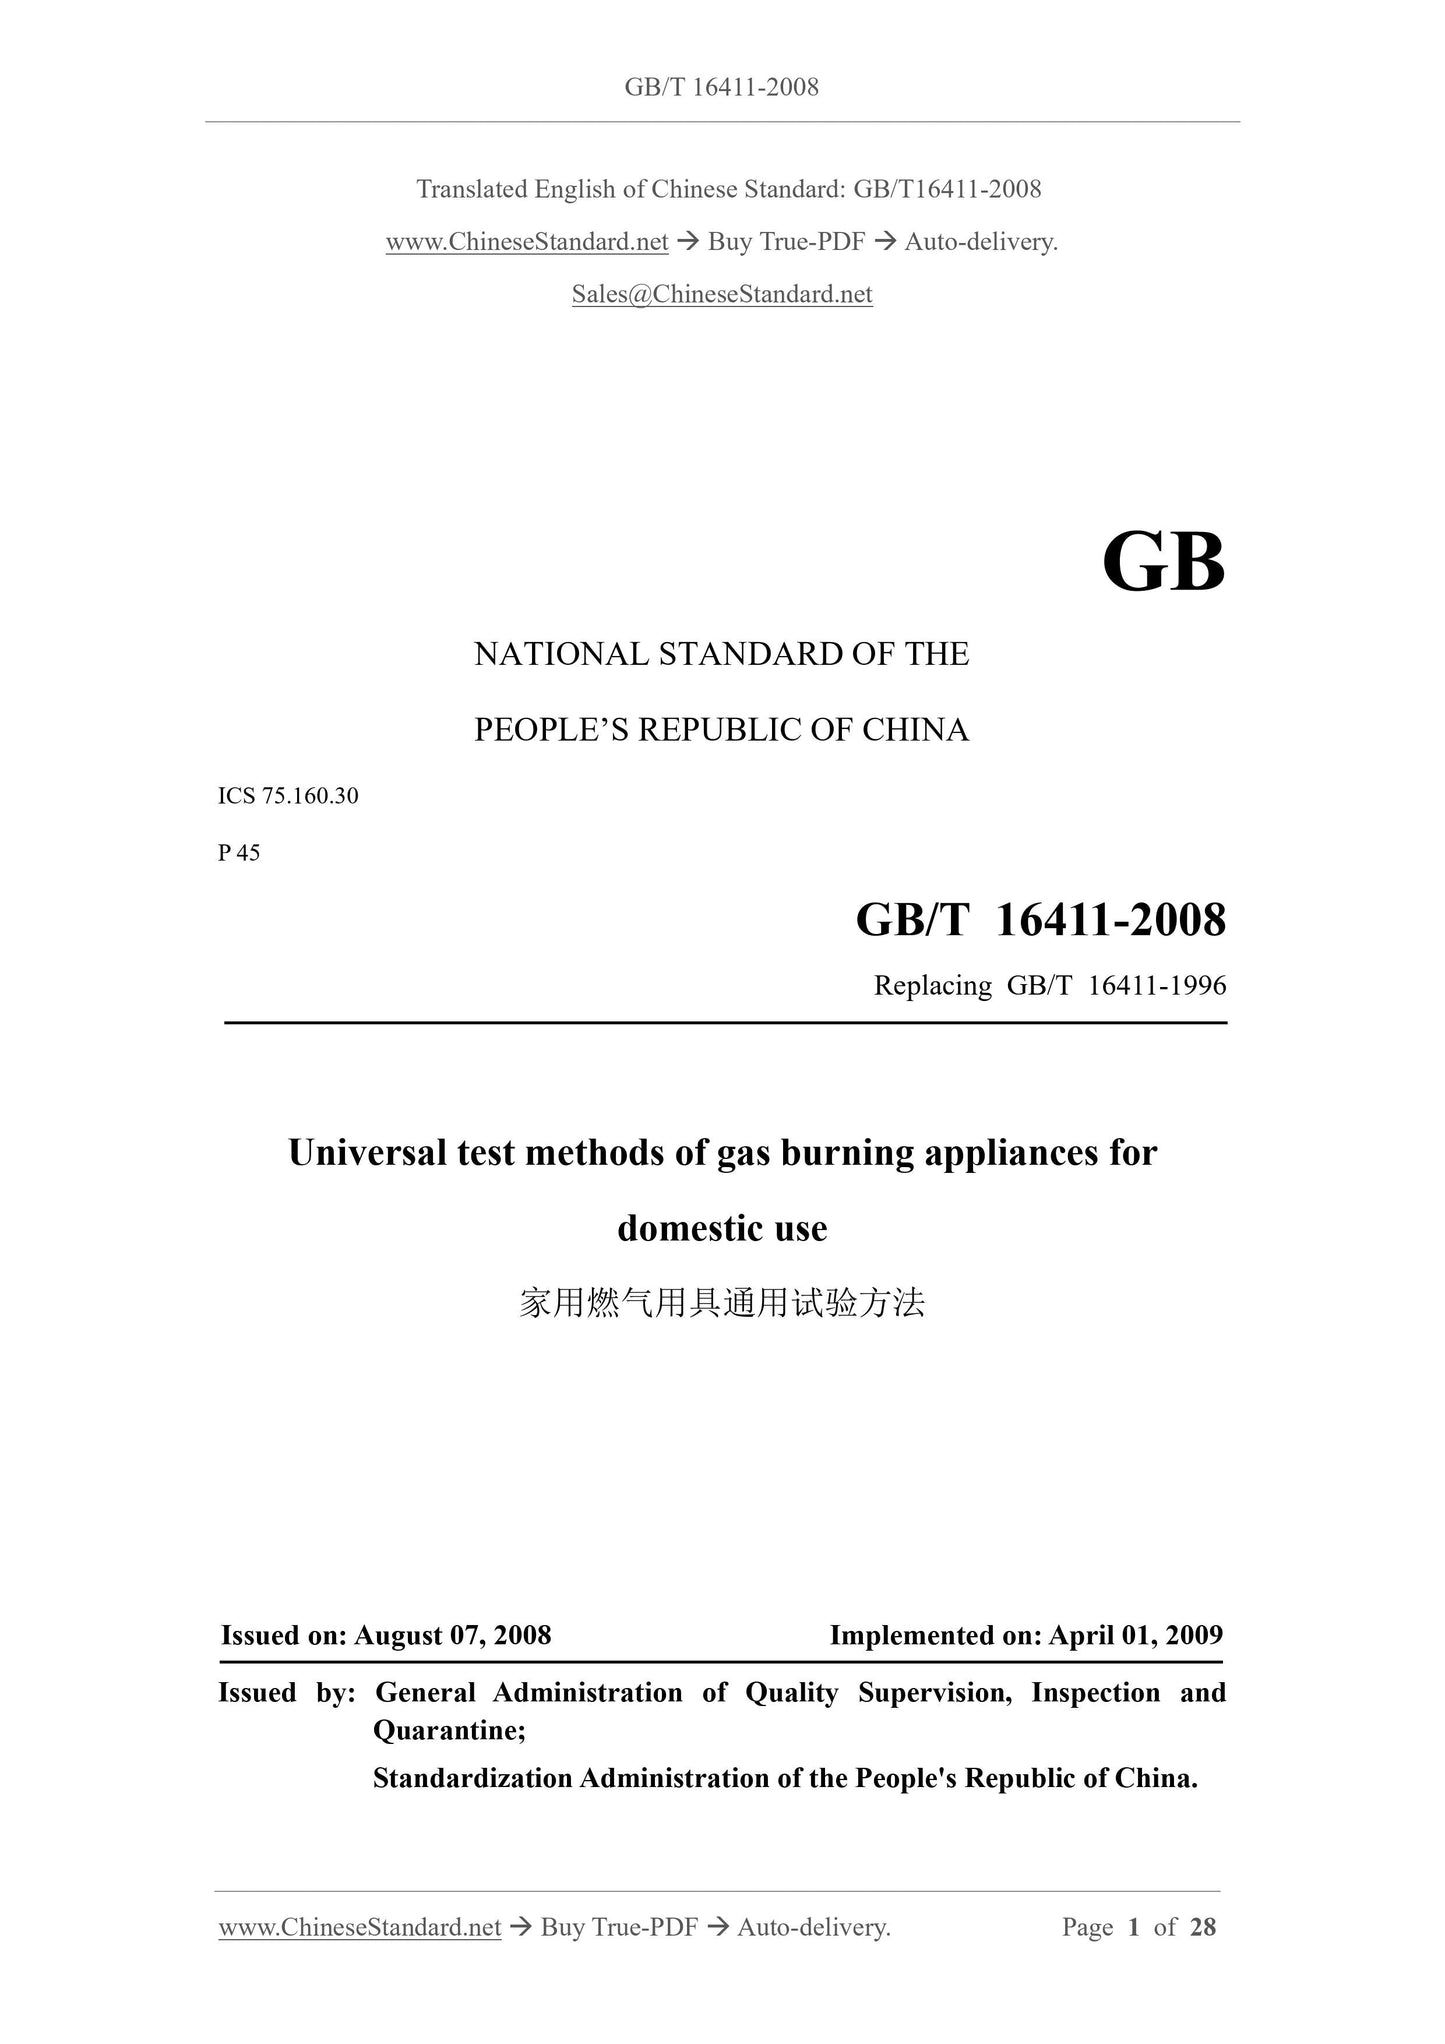 GB/T 16411-2008 Page 1